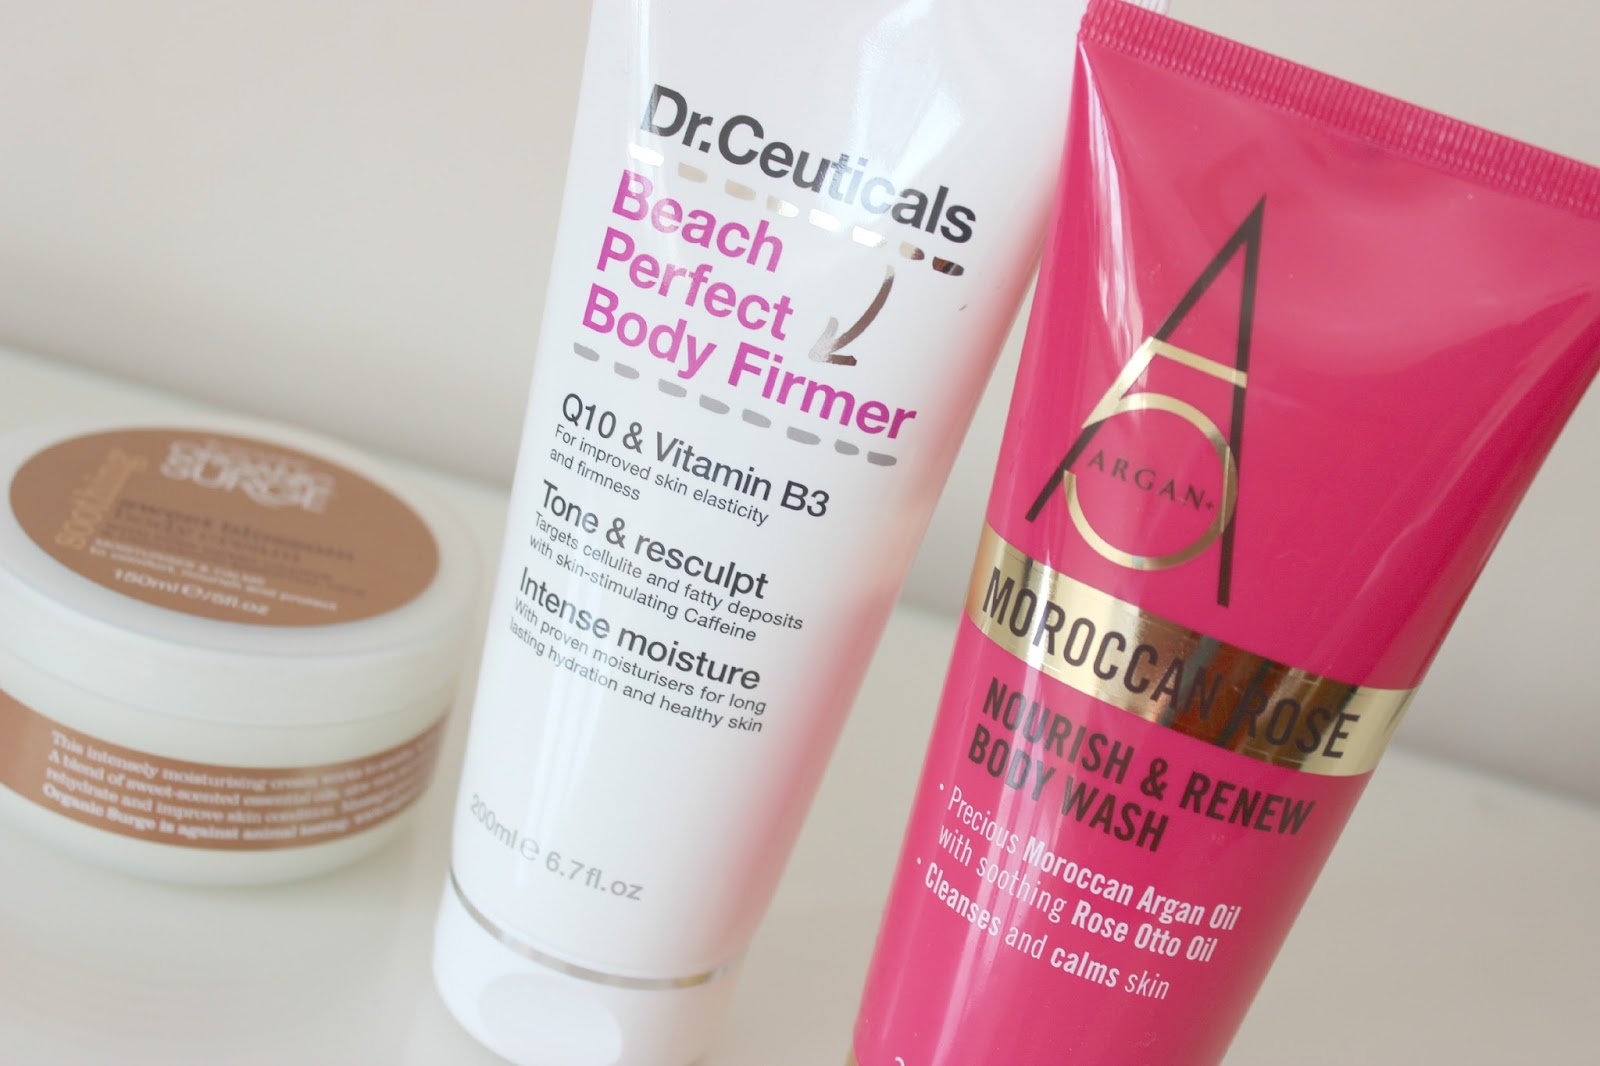 A picture of Dr. Ceuticals Beach Perfect Body Firmer, Organic Surge Soothing Sweet Blossom Body Cream and Argan+ 5 Moroccan Rose Nourish & Renew Body Wash.